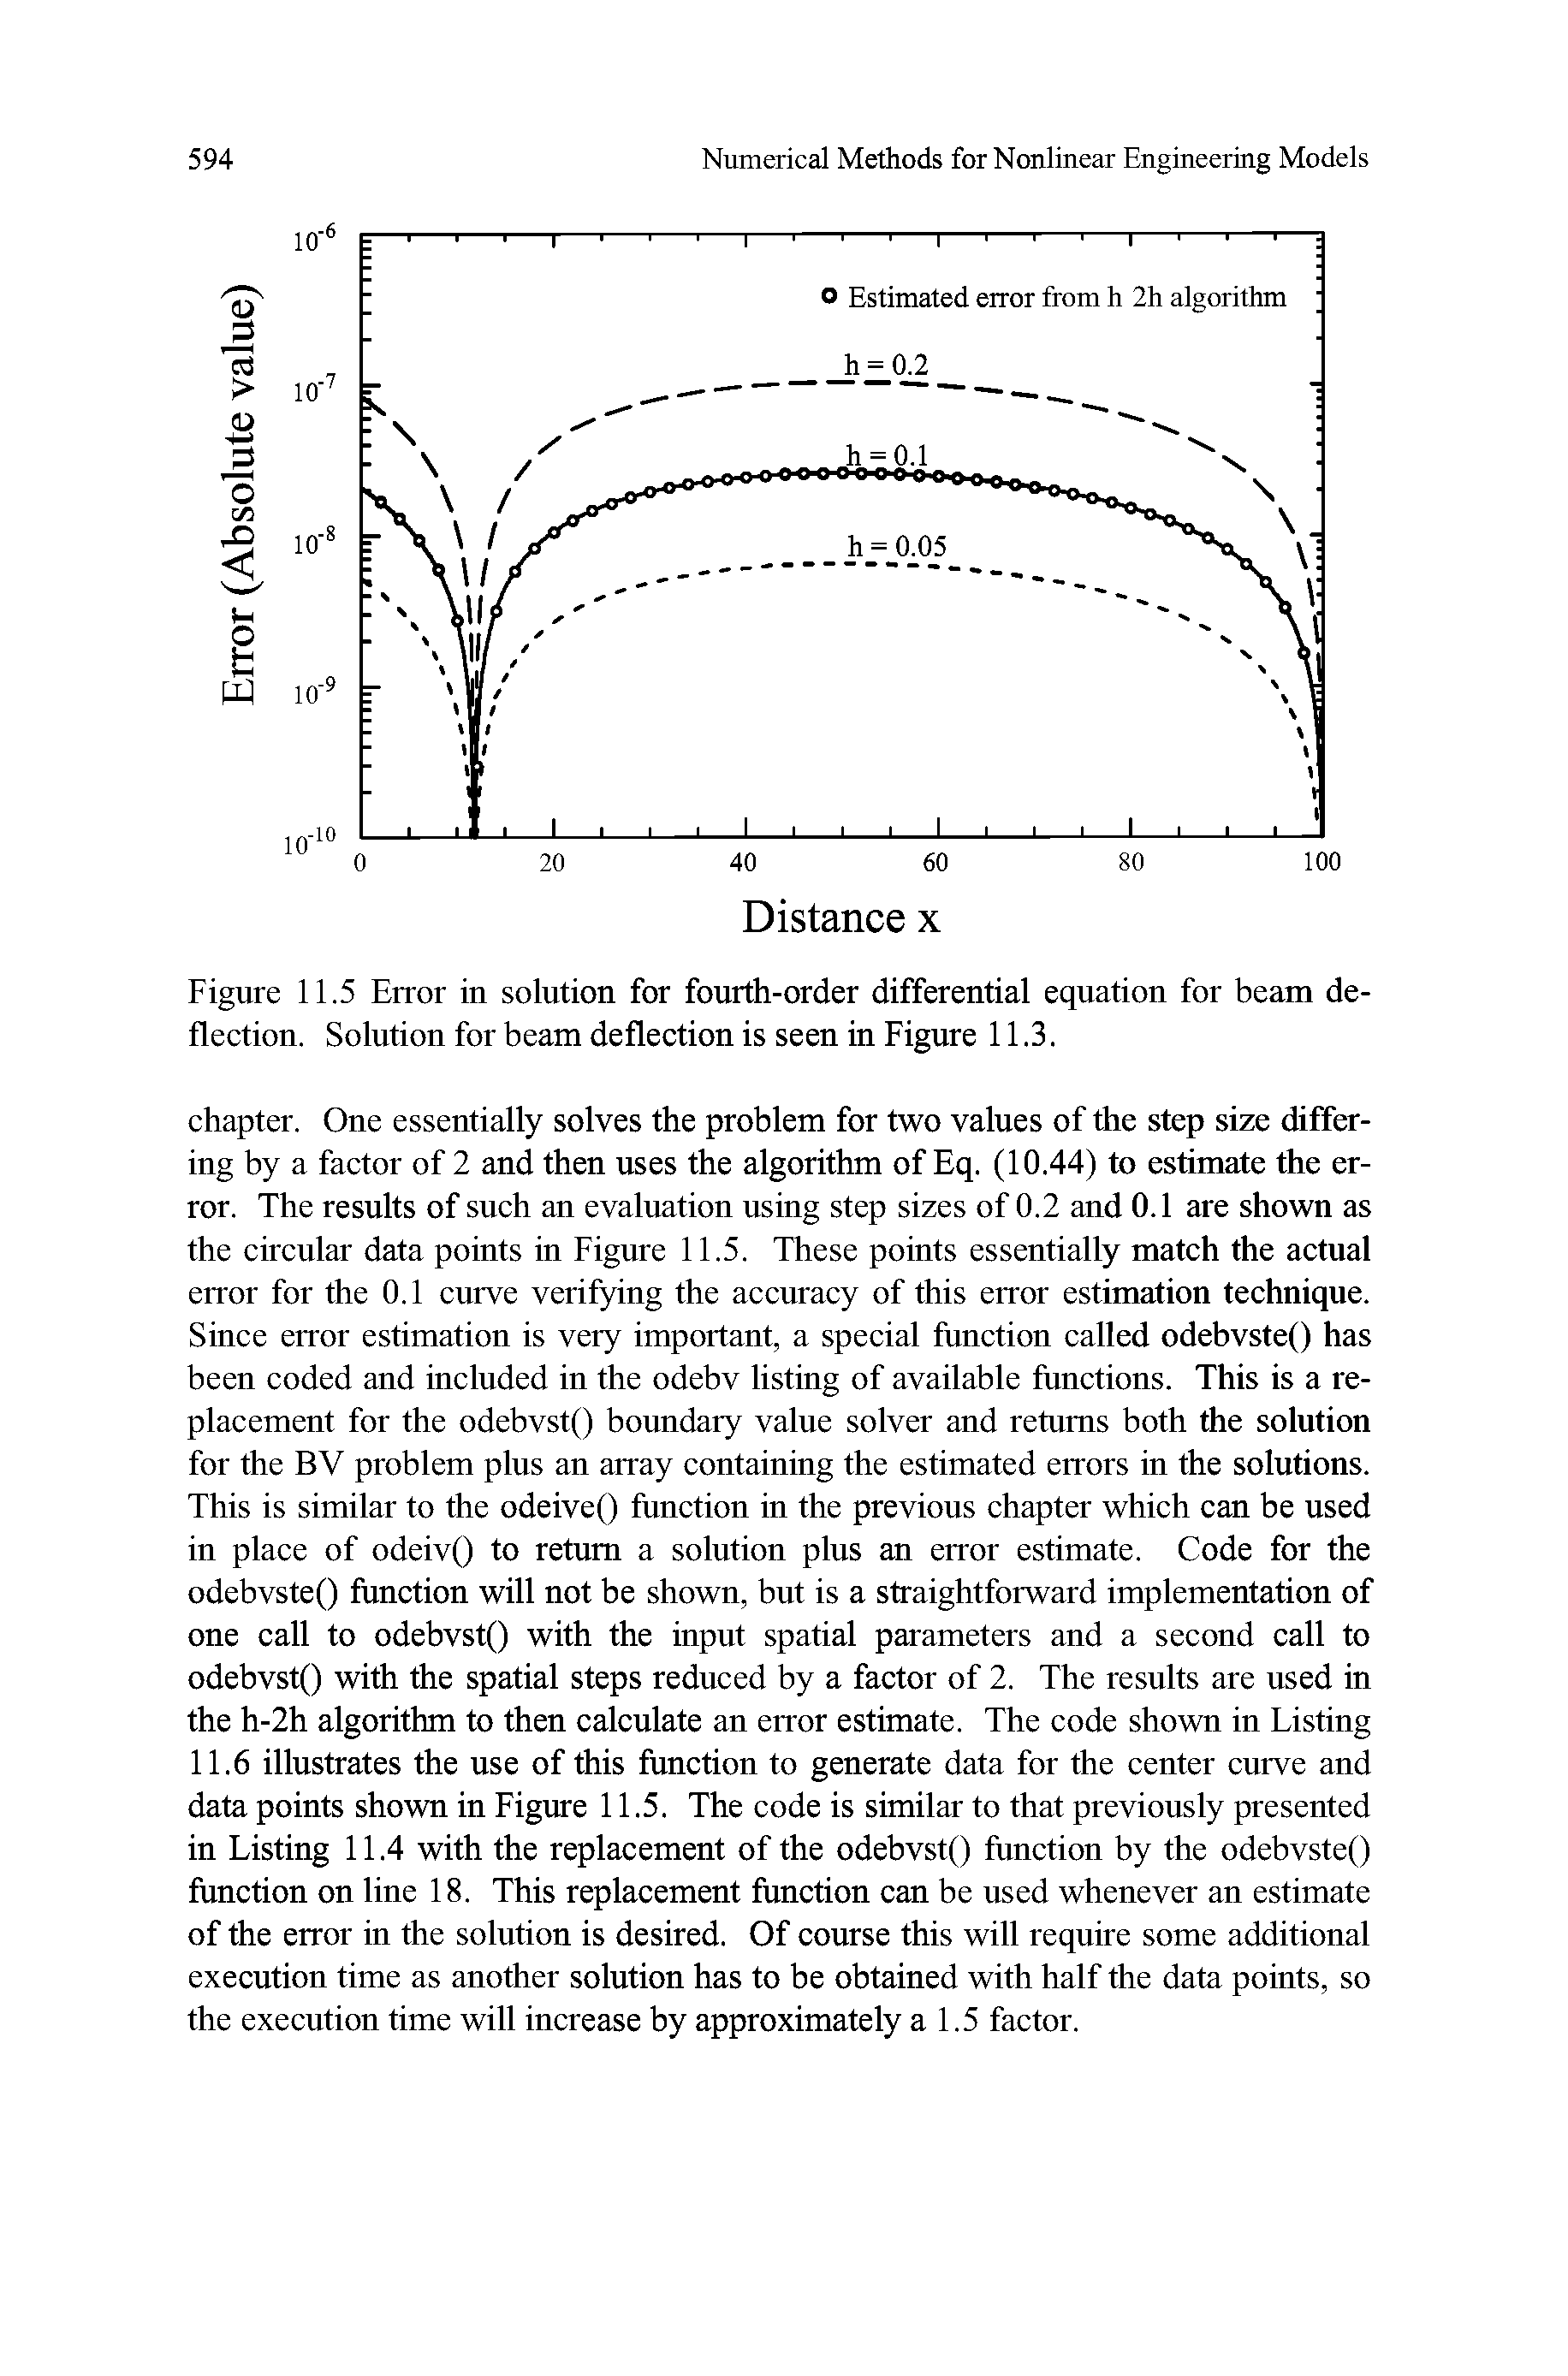 Figure 11.5 Error in solution for fourth-order differential equation for beam de-fleetion. Solution for beam deflection is seen in Figure 11.3.